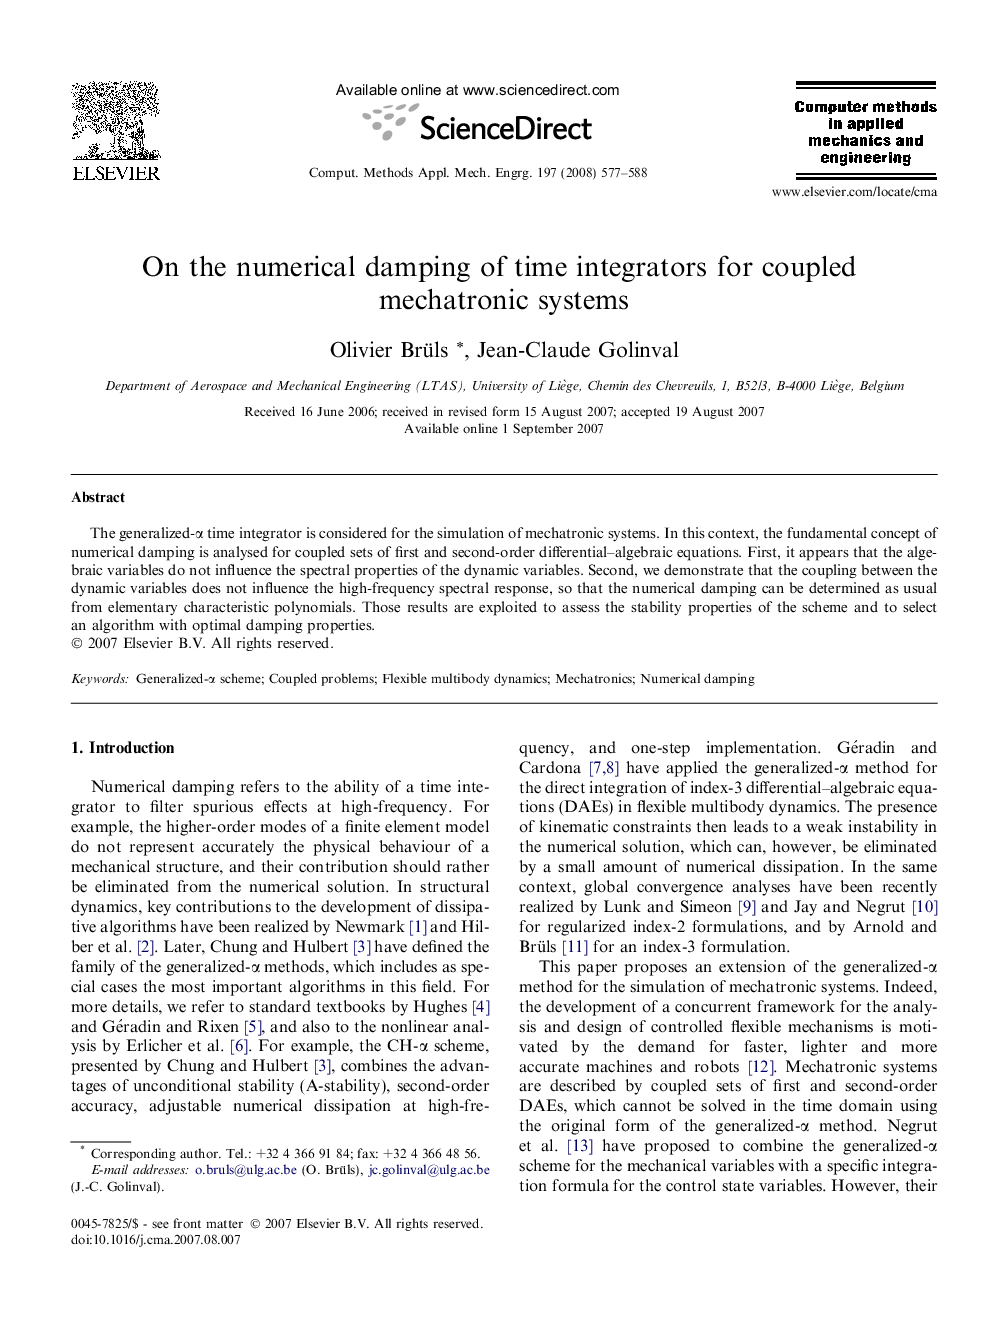 On the numerical damping of time integrators for coupled mechatronic systems